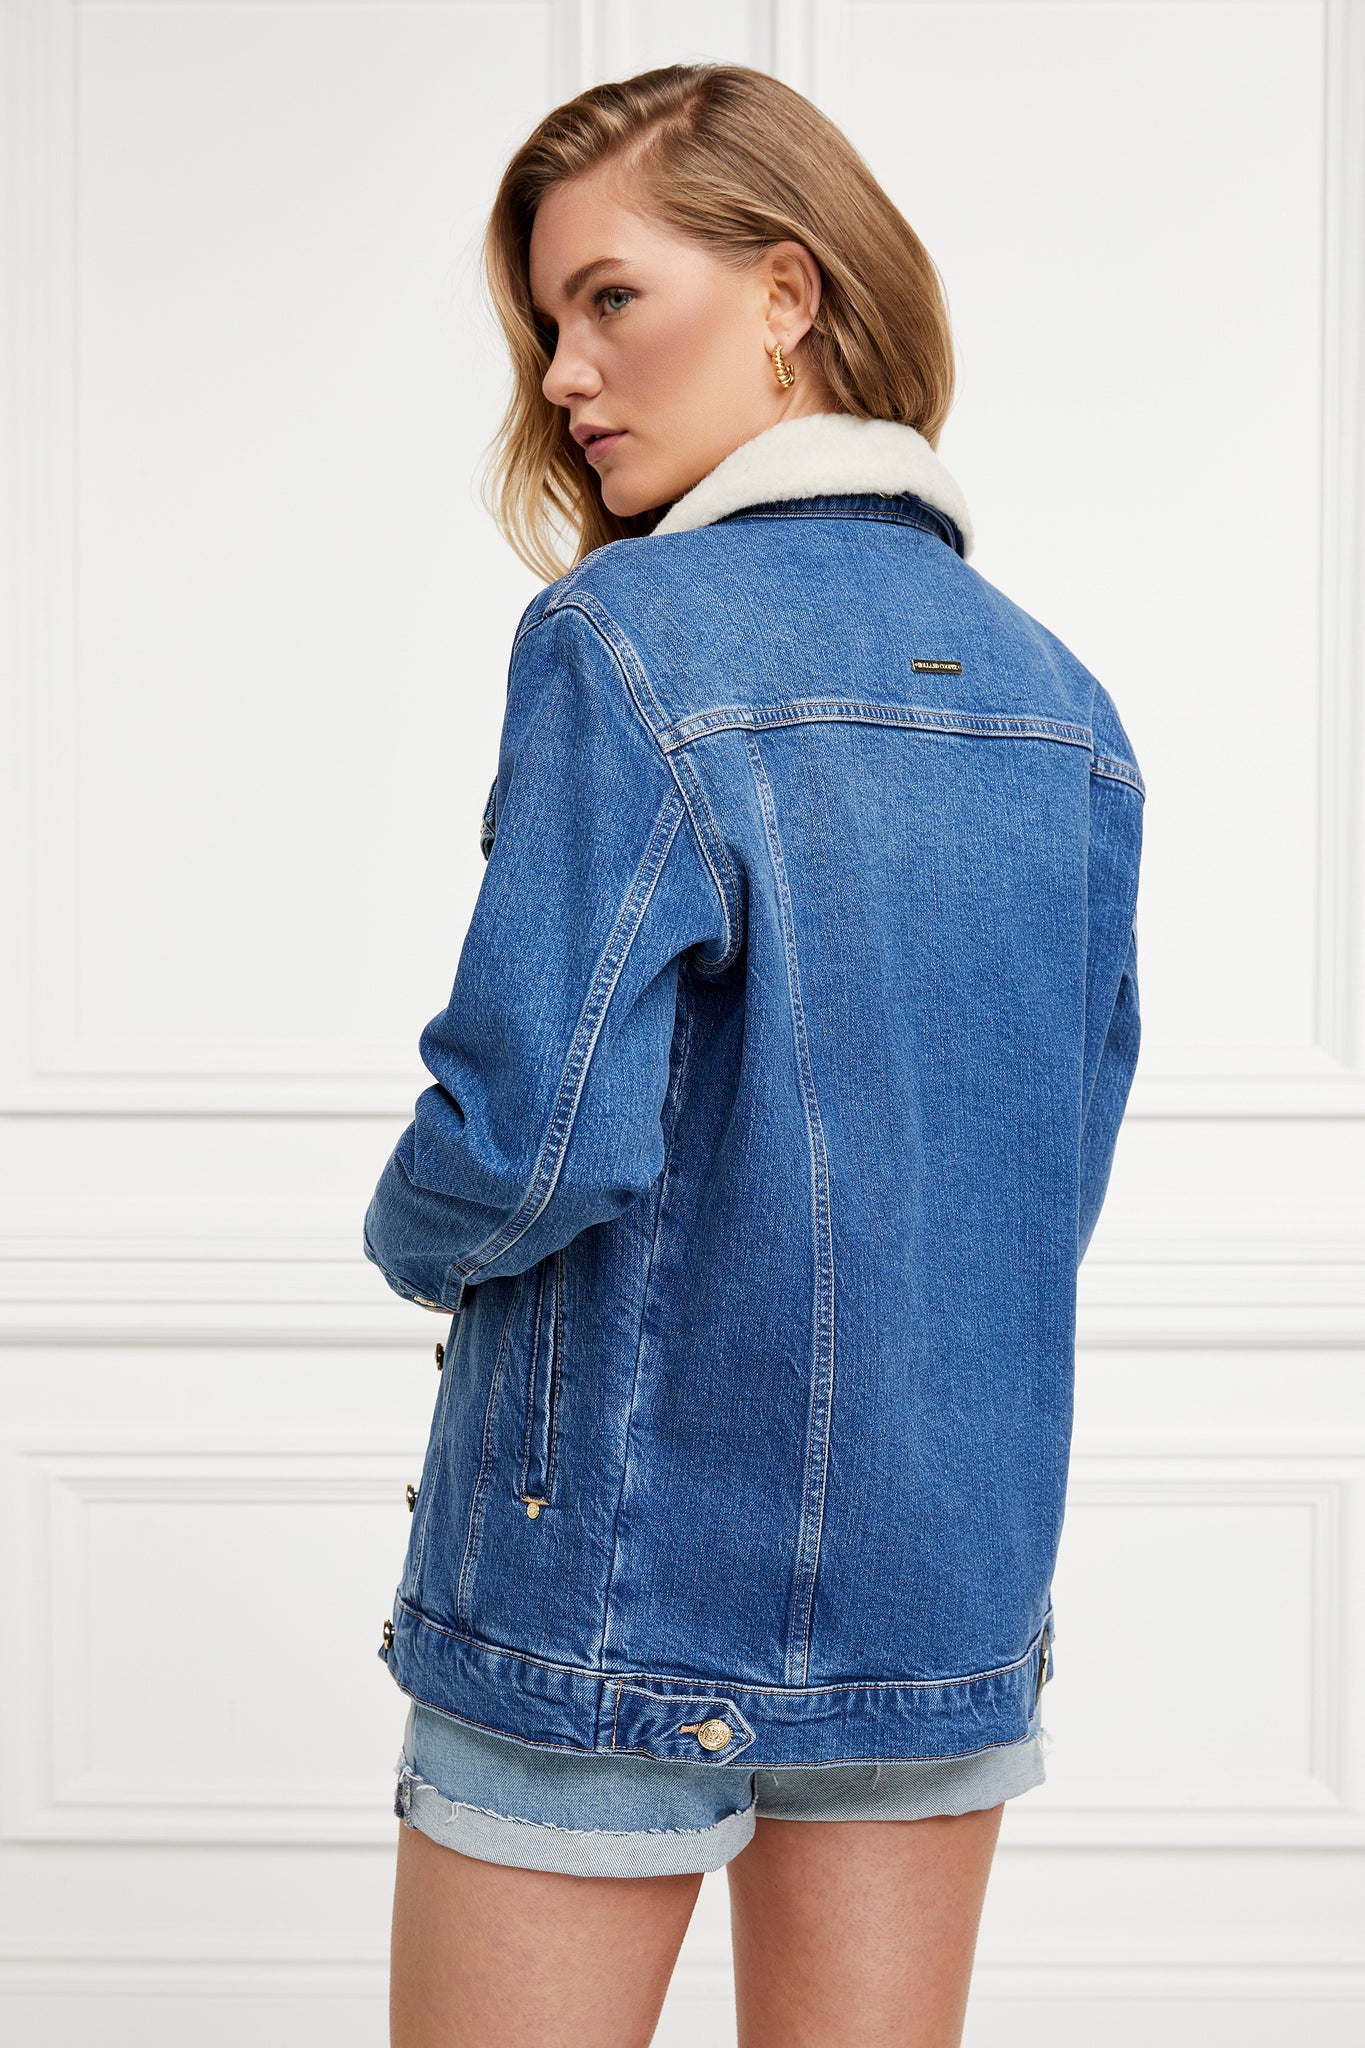 Removable Sherpa Collar Denim Jacket  Sale from Yumi Clothing UK